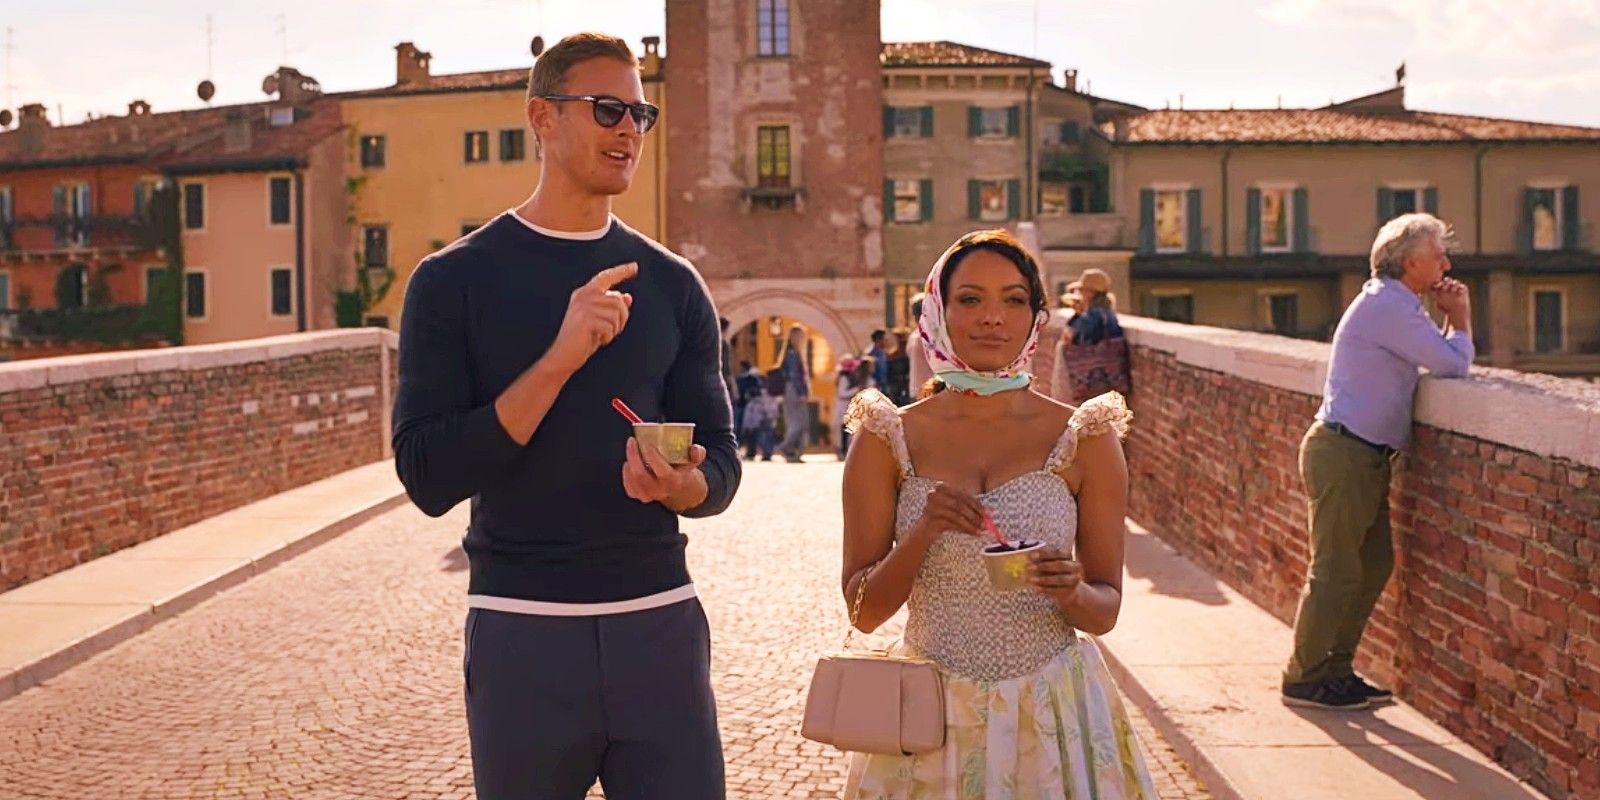 Kat Graham As Julie and Tom Hopper as Charlie in Love in the Villa